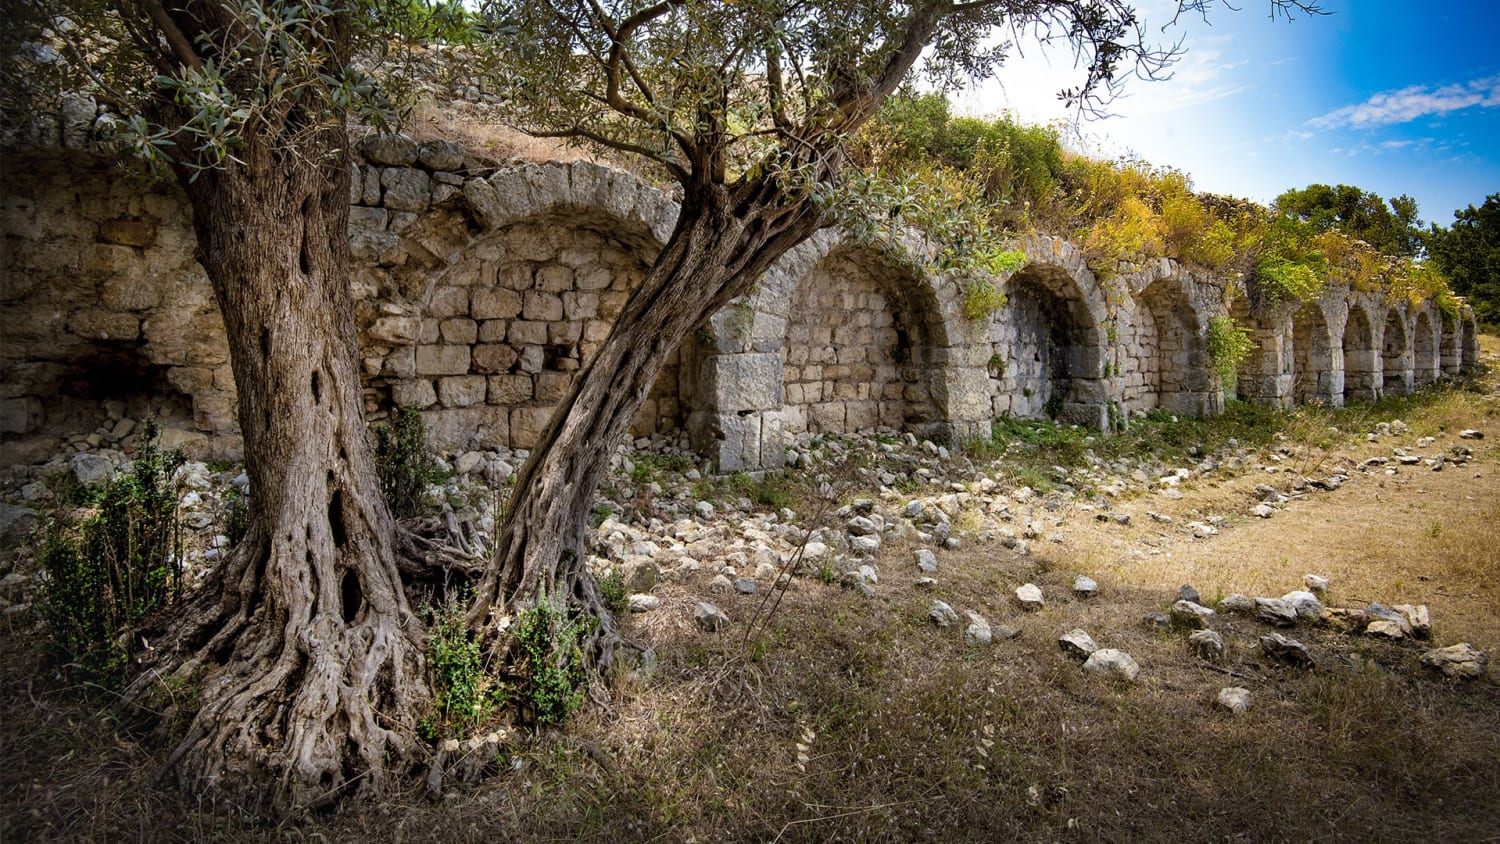 Teos: century-old olive trees, an antique harbor, and Dionysus